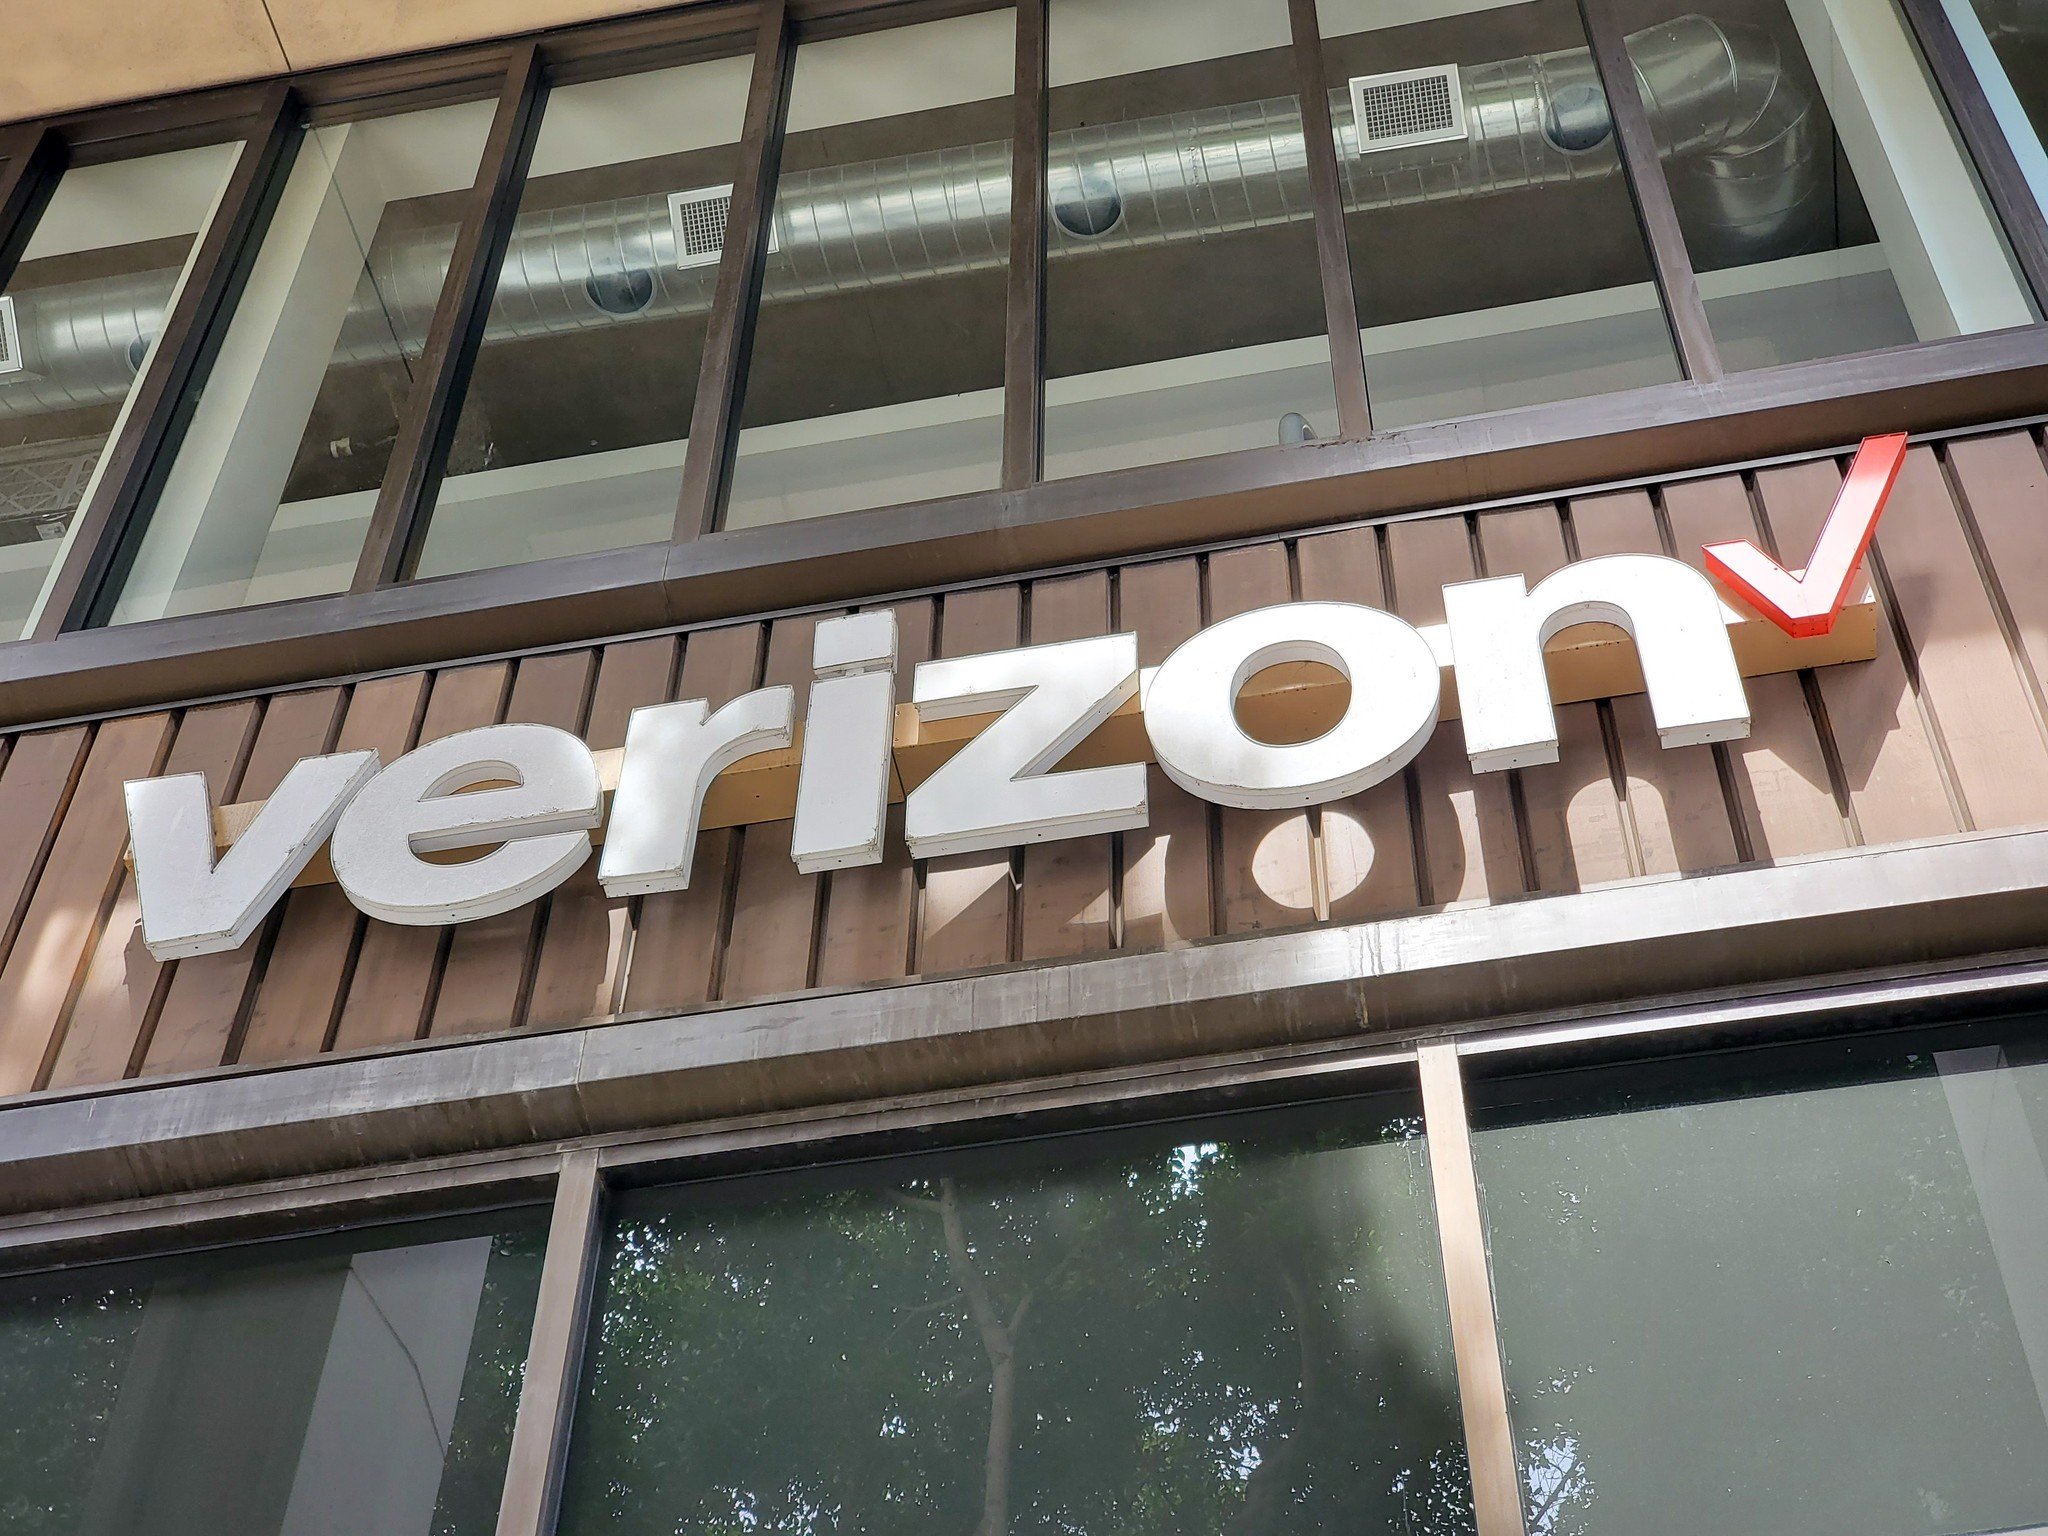 Google Play Store is dropping carrier billing support for Verizon